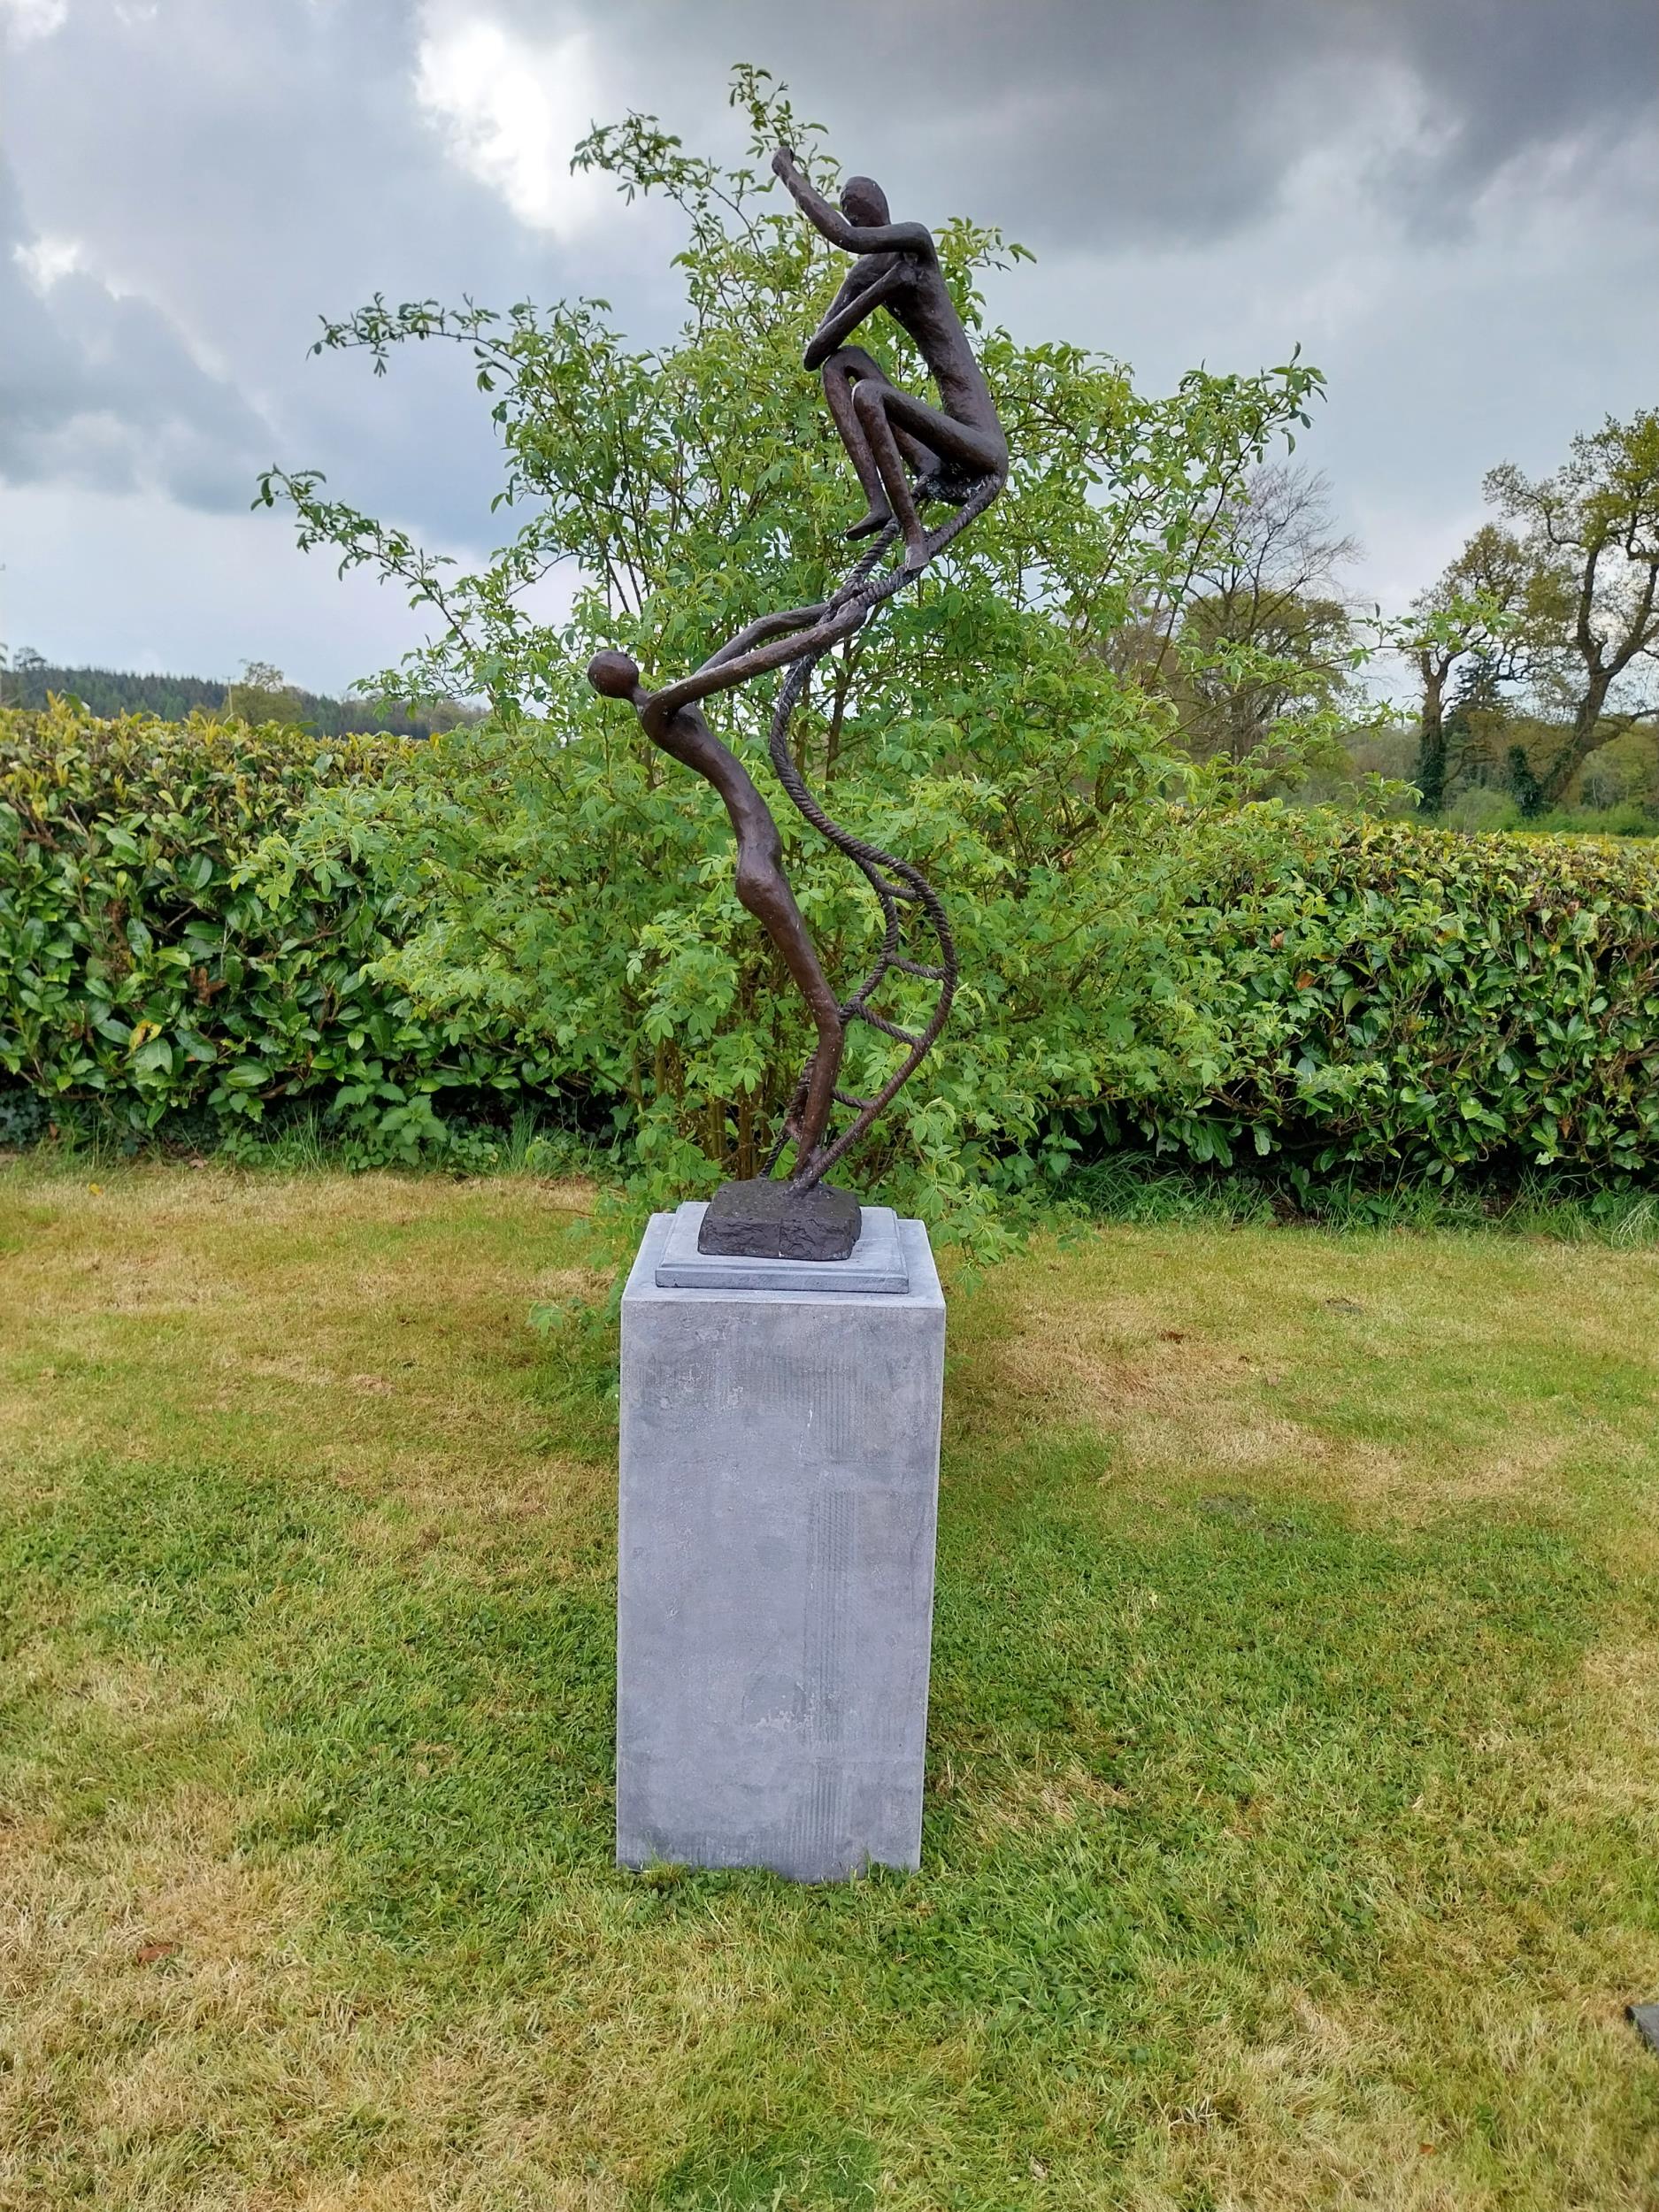 Exceptional quality contemporary bronze sculpture 'The Rope Climbing Acrobats' raised on slate